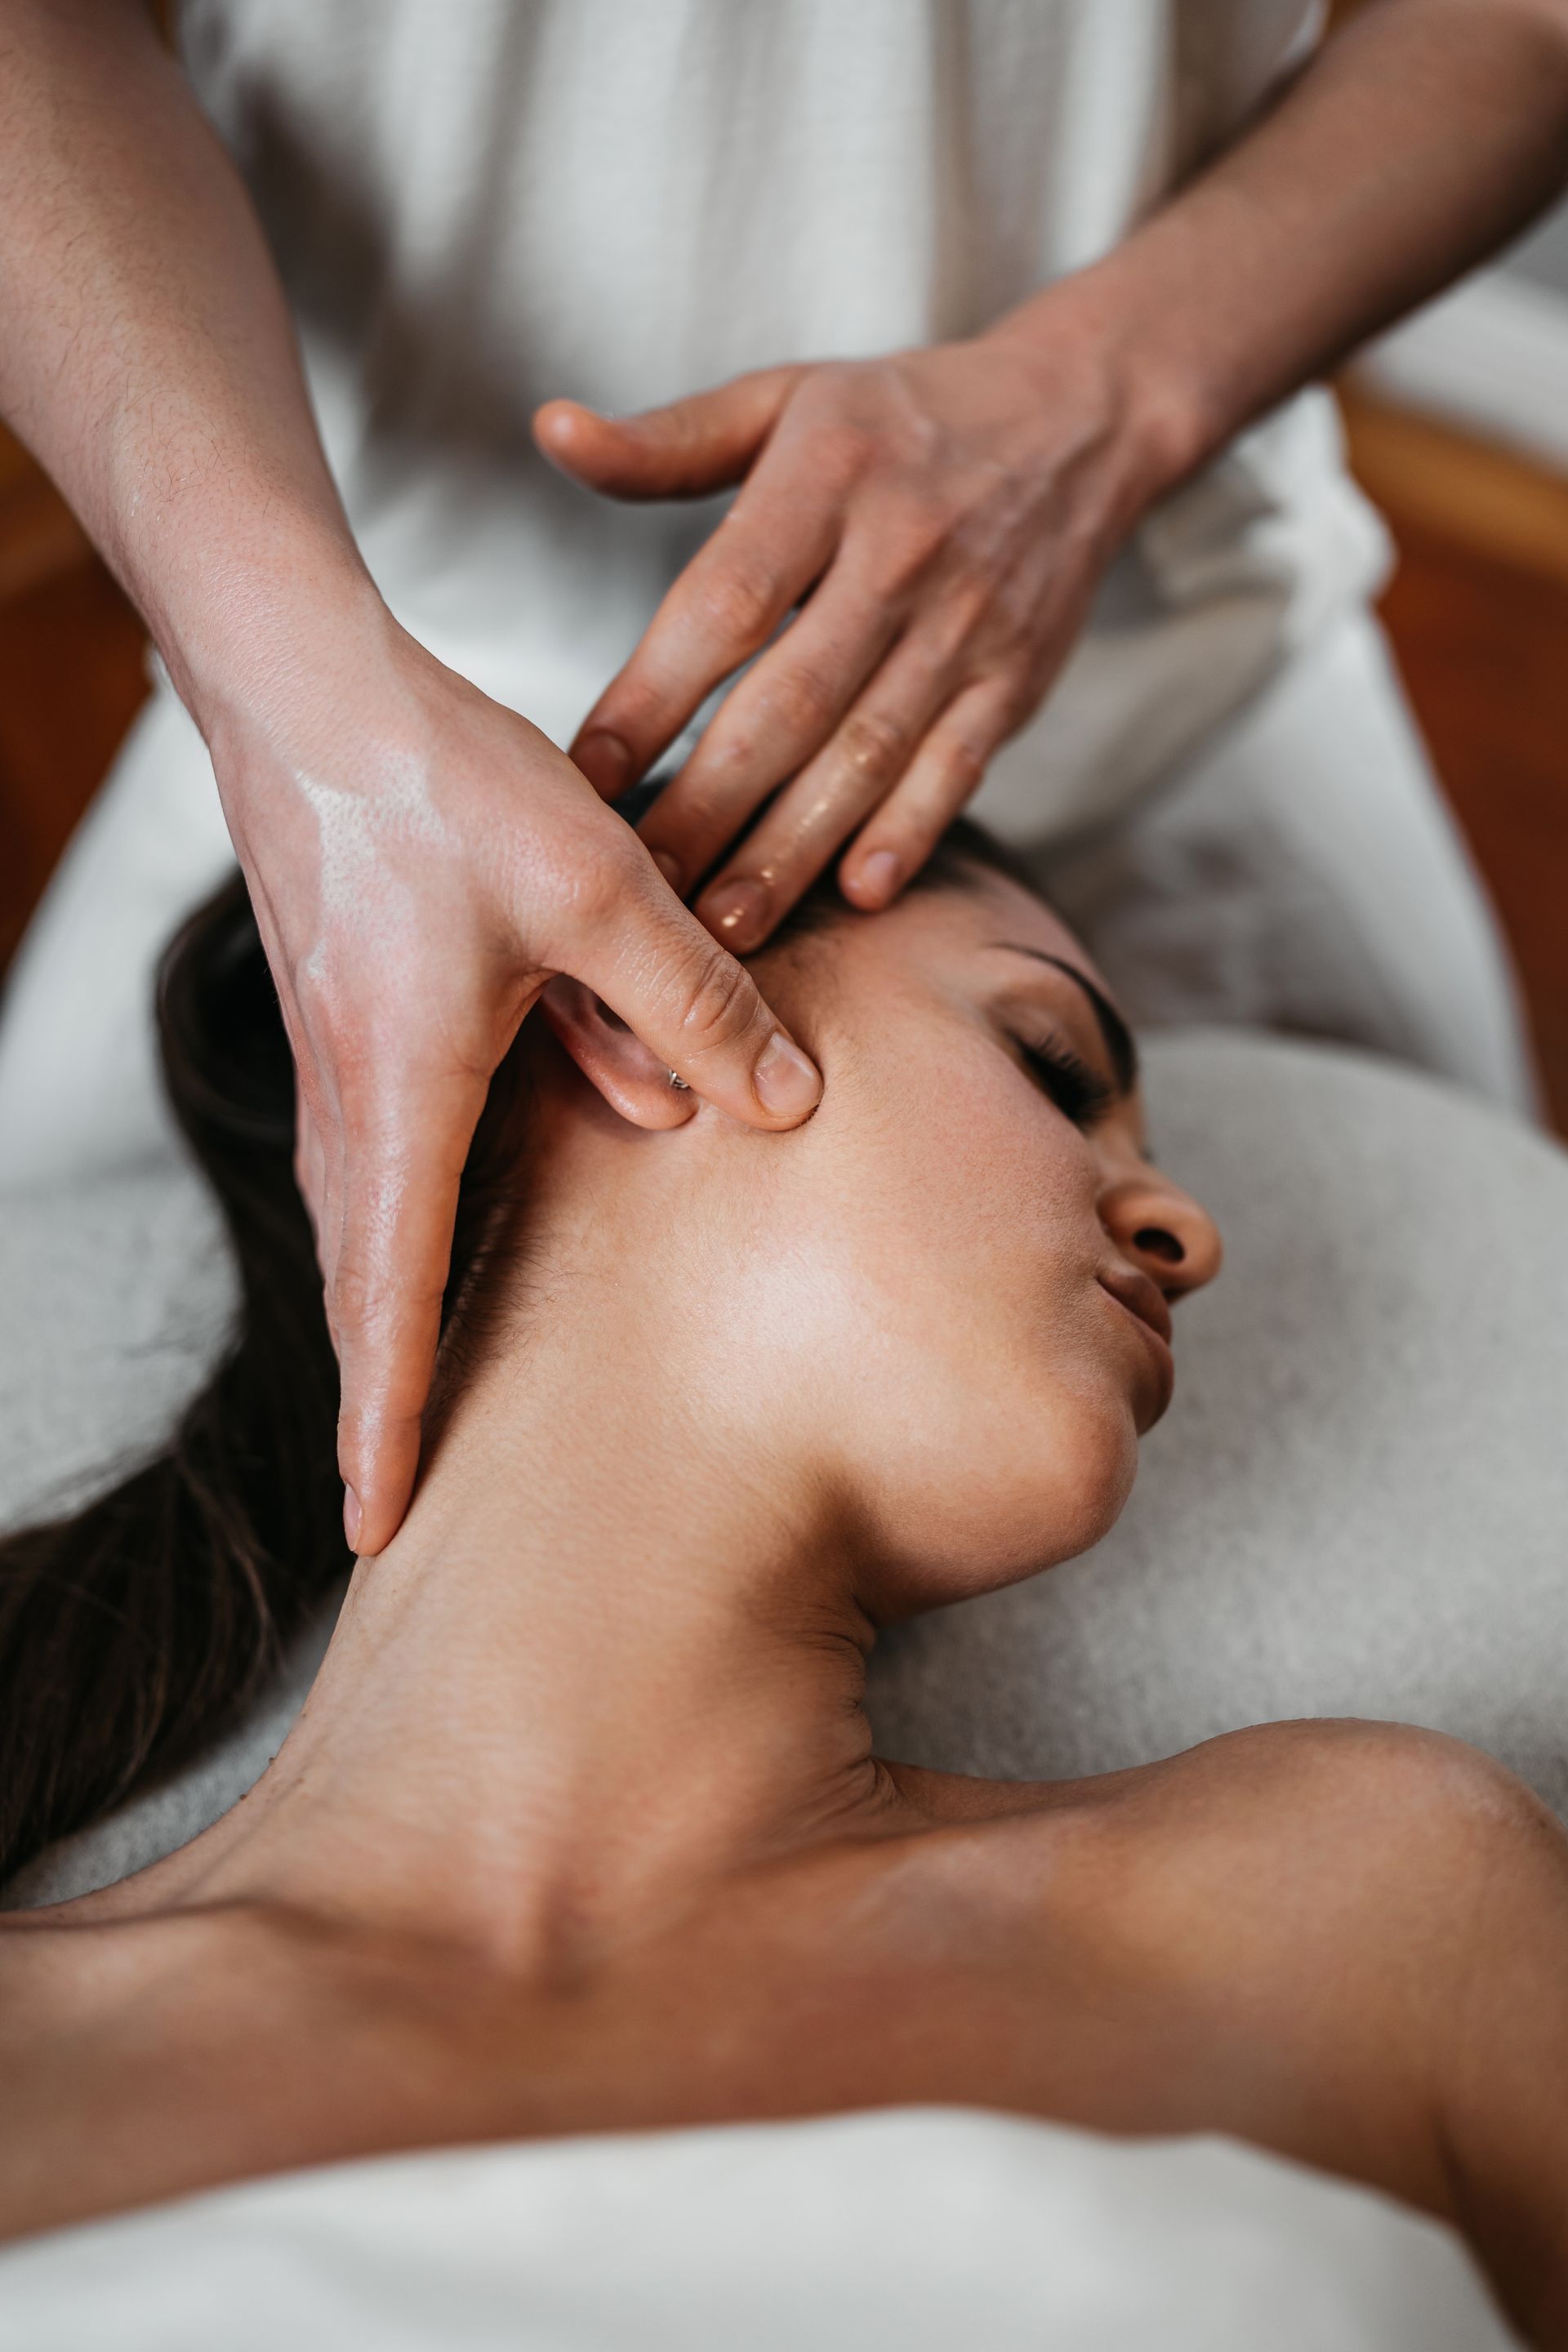 A woman is getting a head massage at a spa.